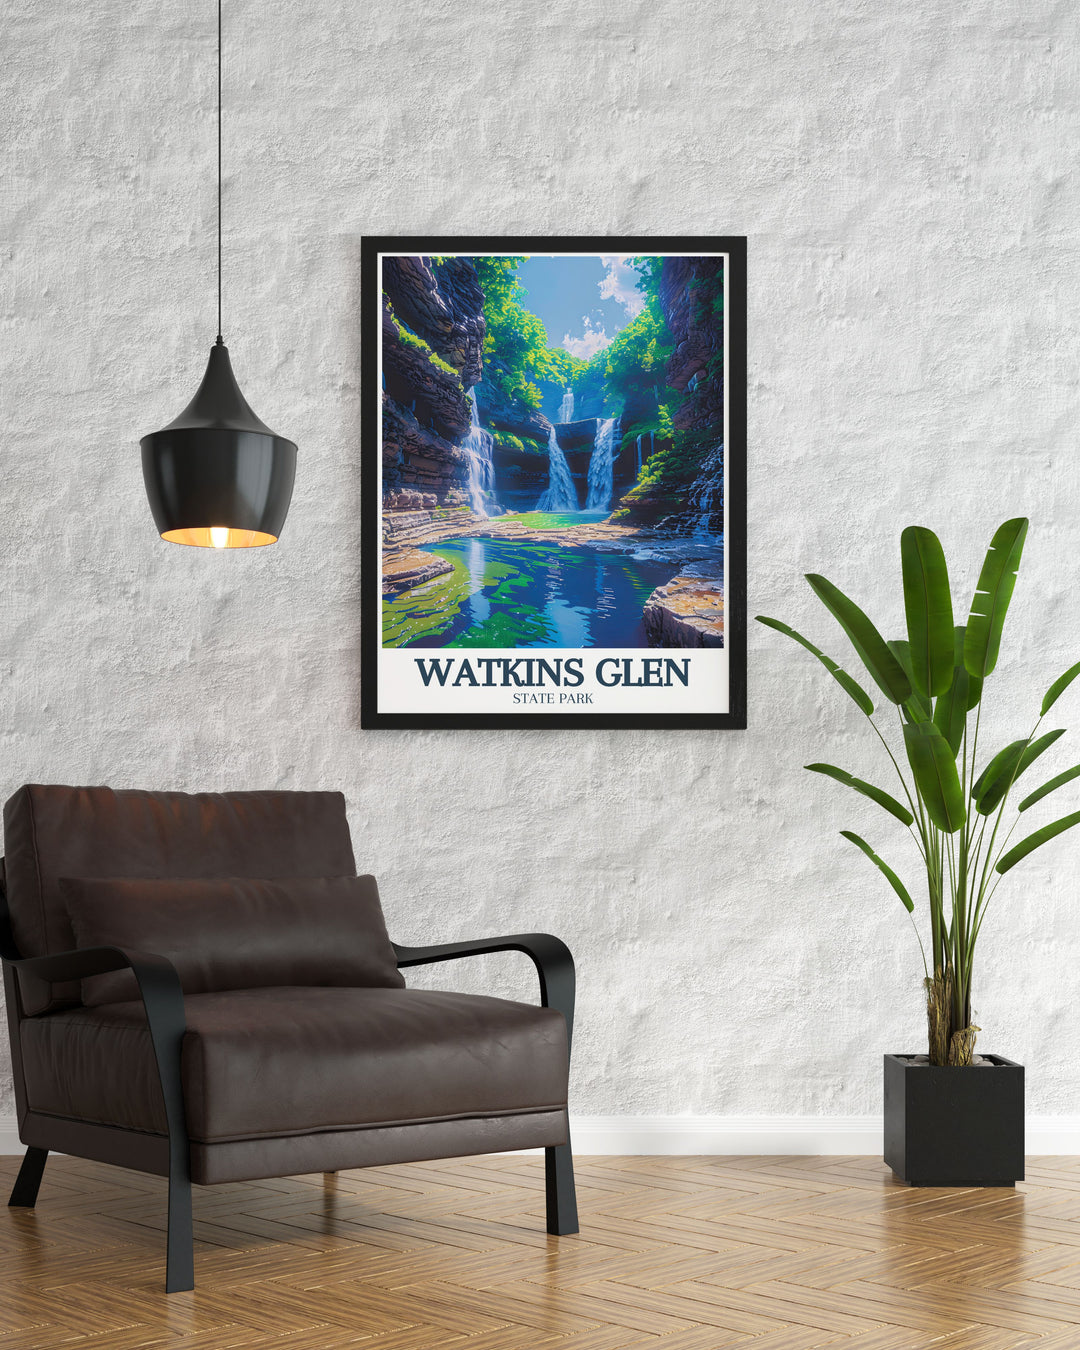 Stunning gallery wall art of Wandsworth Park, London, capturing the parks scenic views and serene landscapes, ideal for creating a peaceful and elegant focal point in your home.